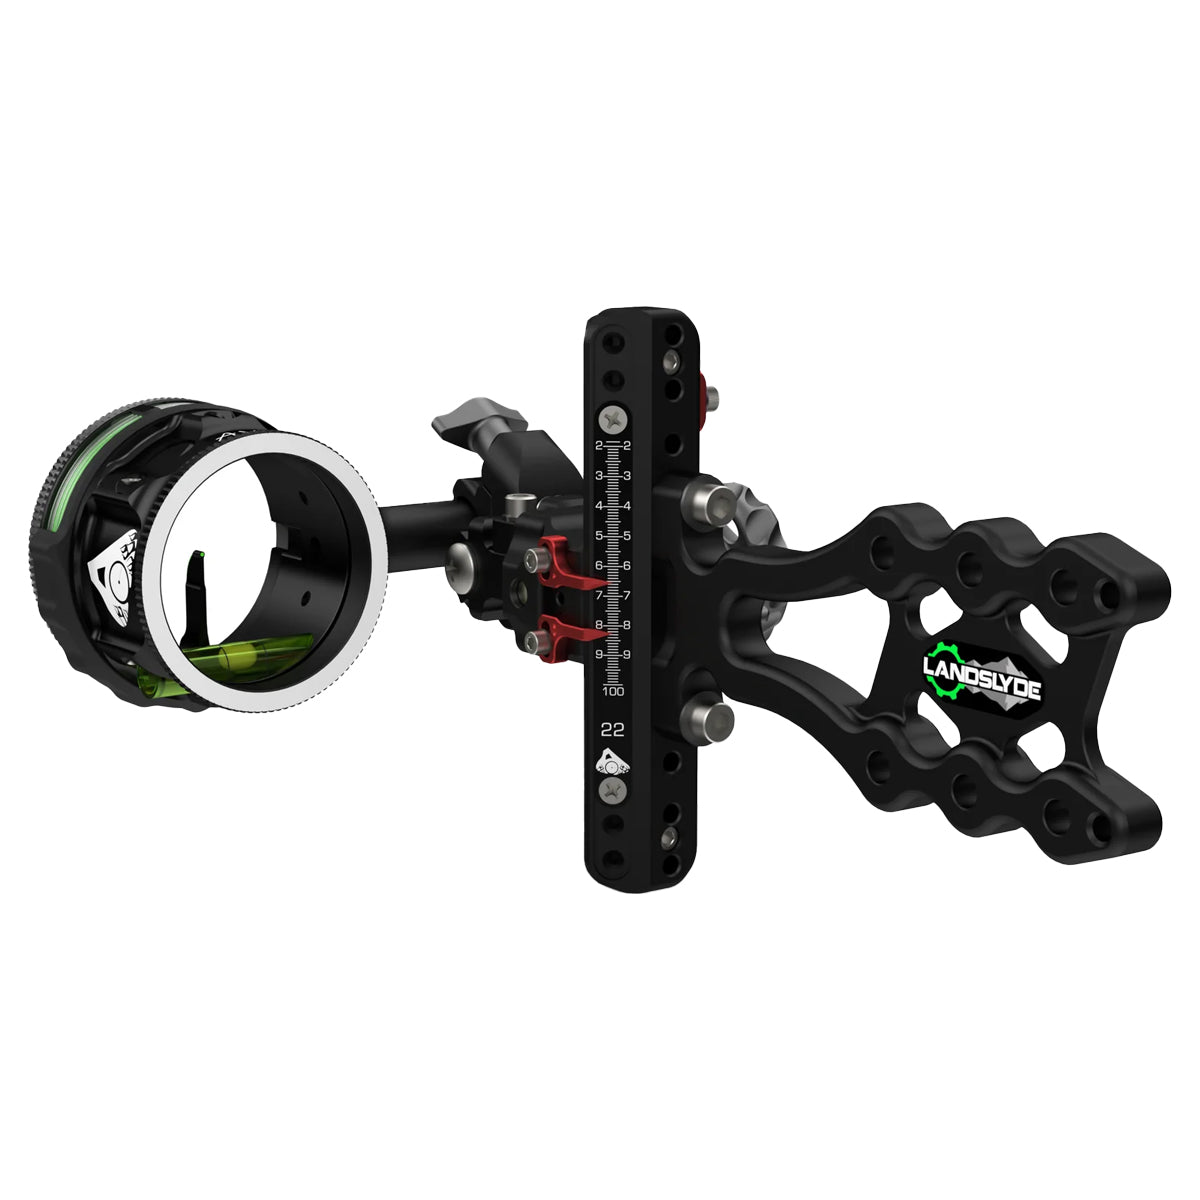 Axcel Landslyde Plus Slider Sight AVX-41 Scope 1 Pin Bow Sight in  by GOHUNT | Axcel - GOHUNT Shop